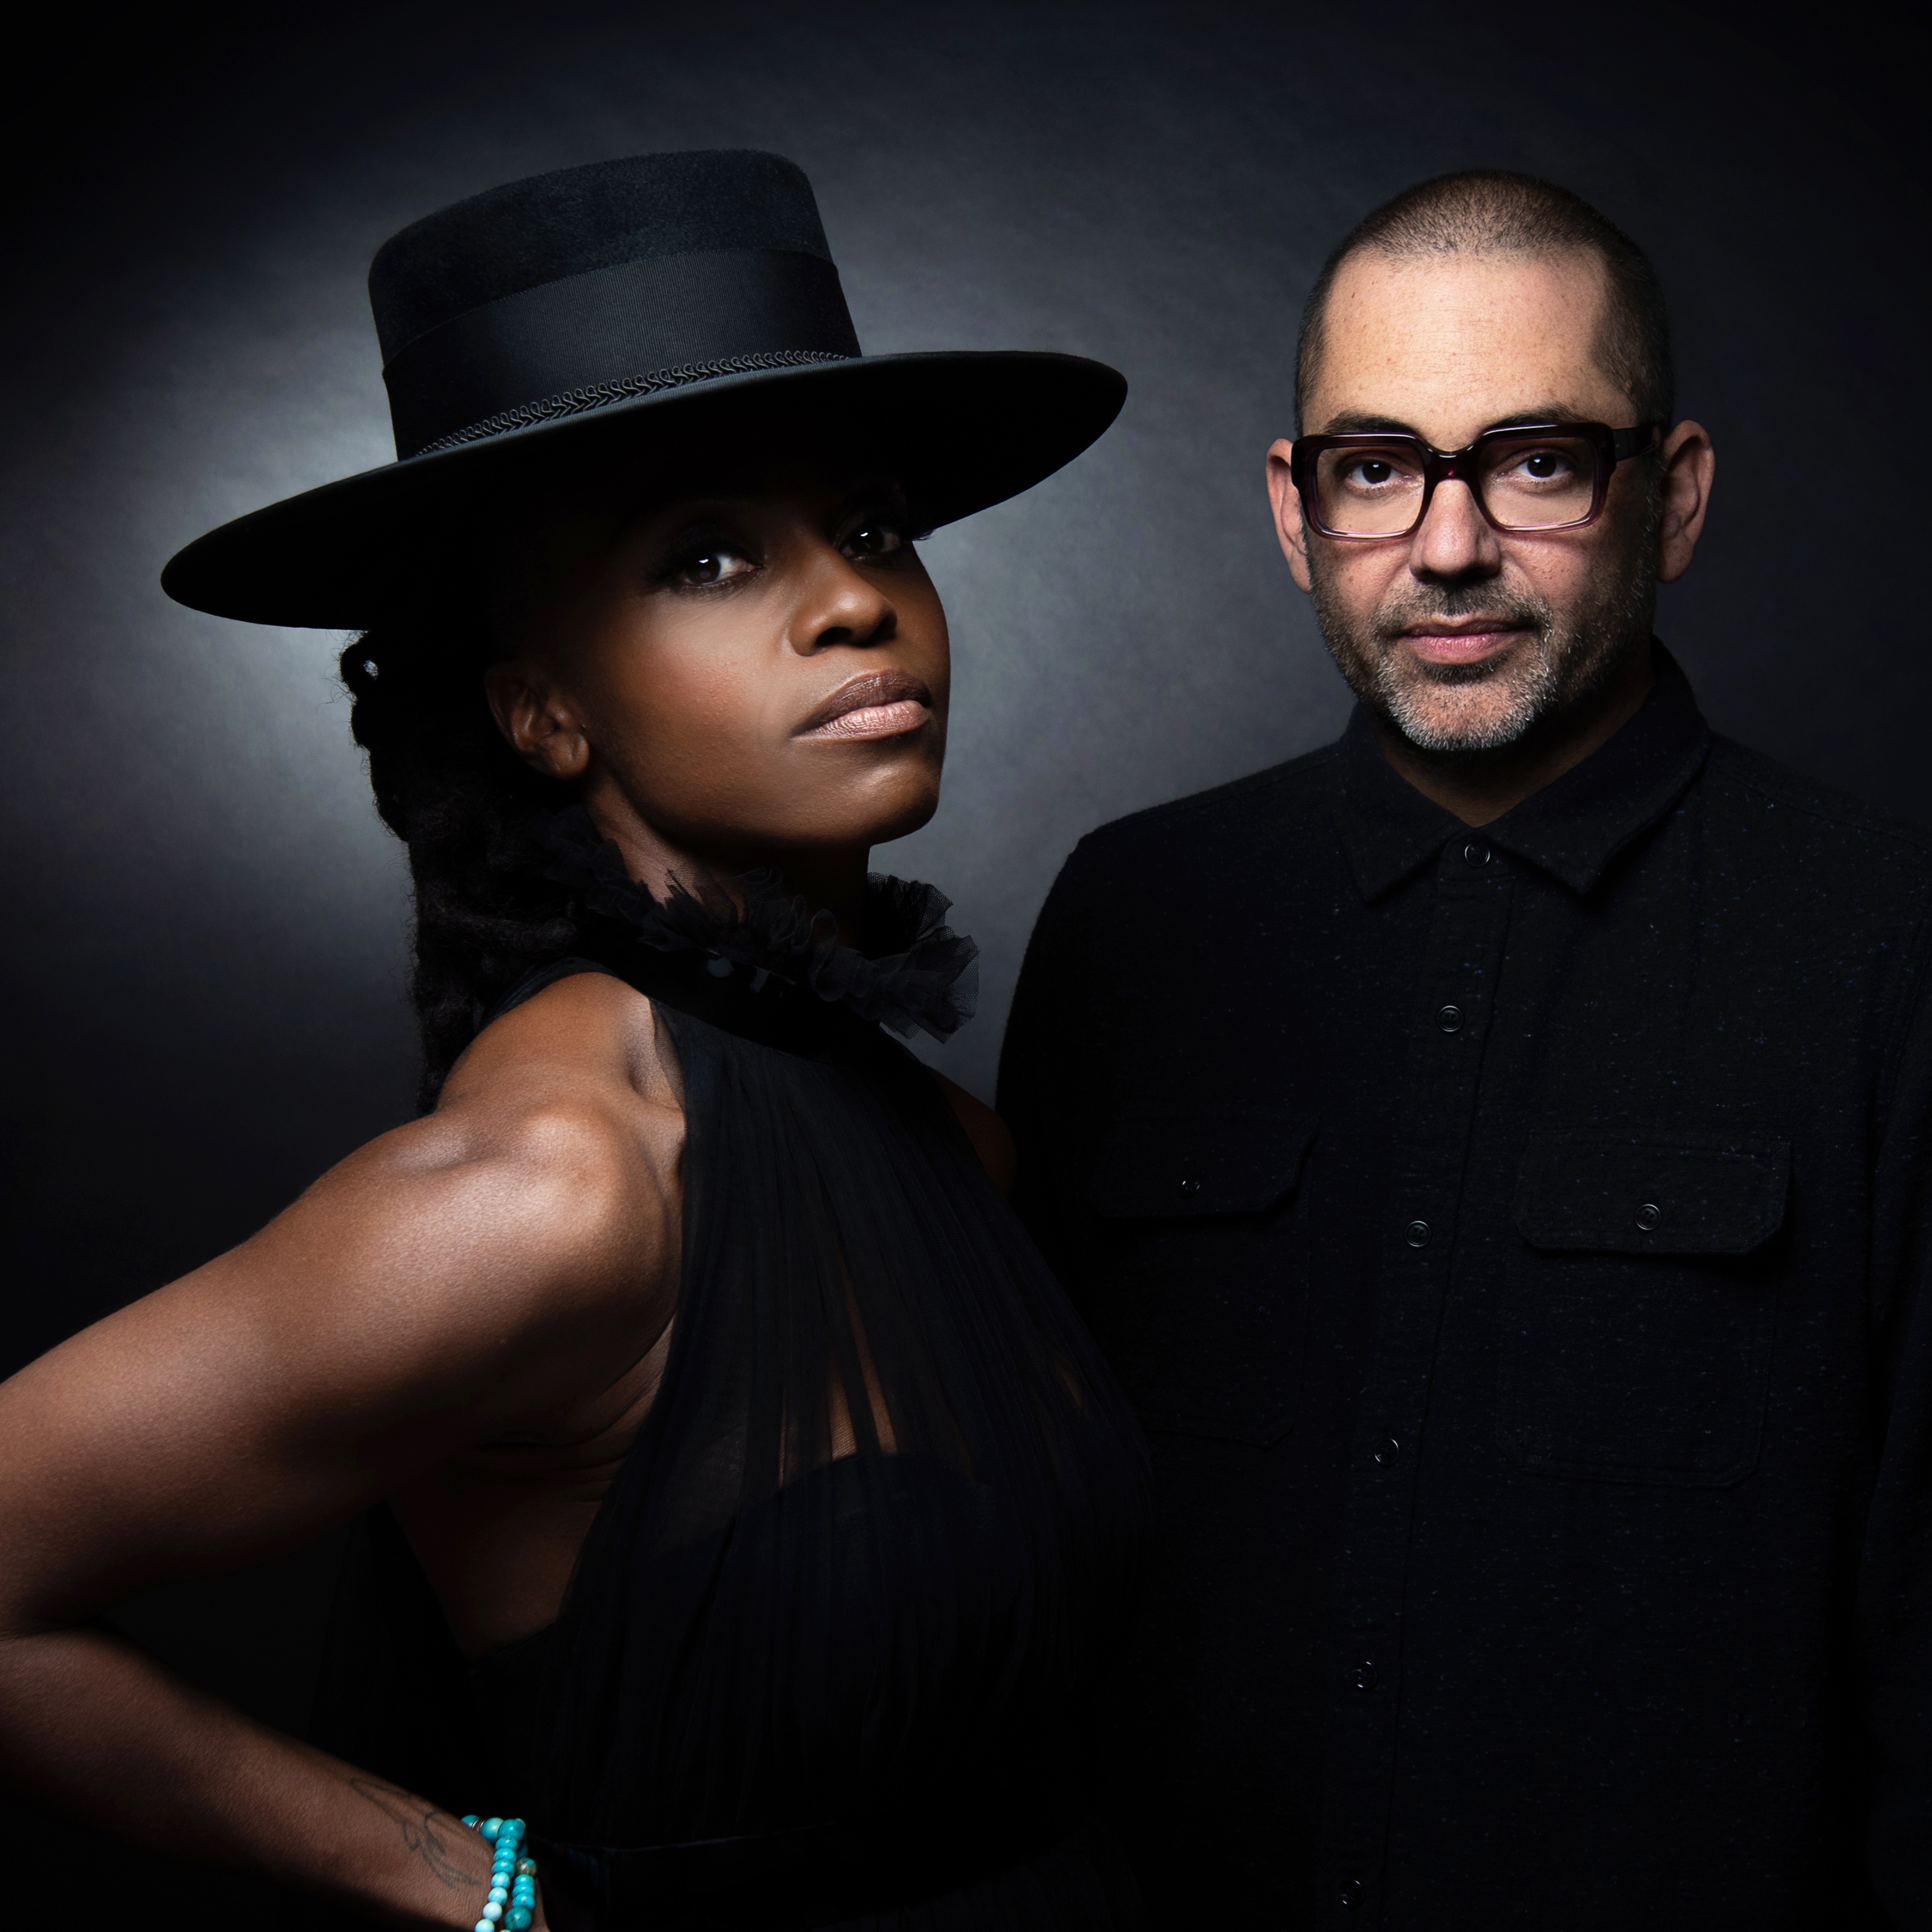 The Morcheeba duo wearing black pose against a black screen.